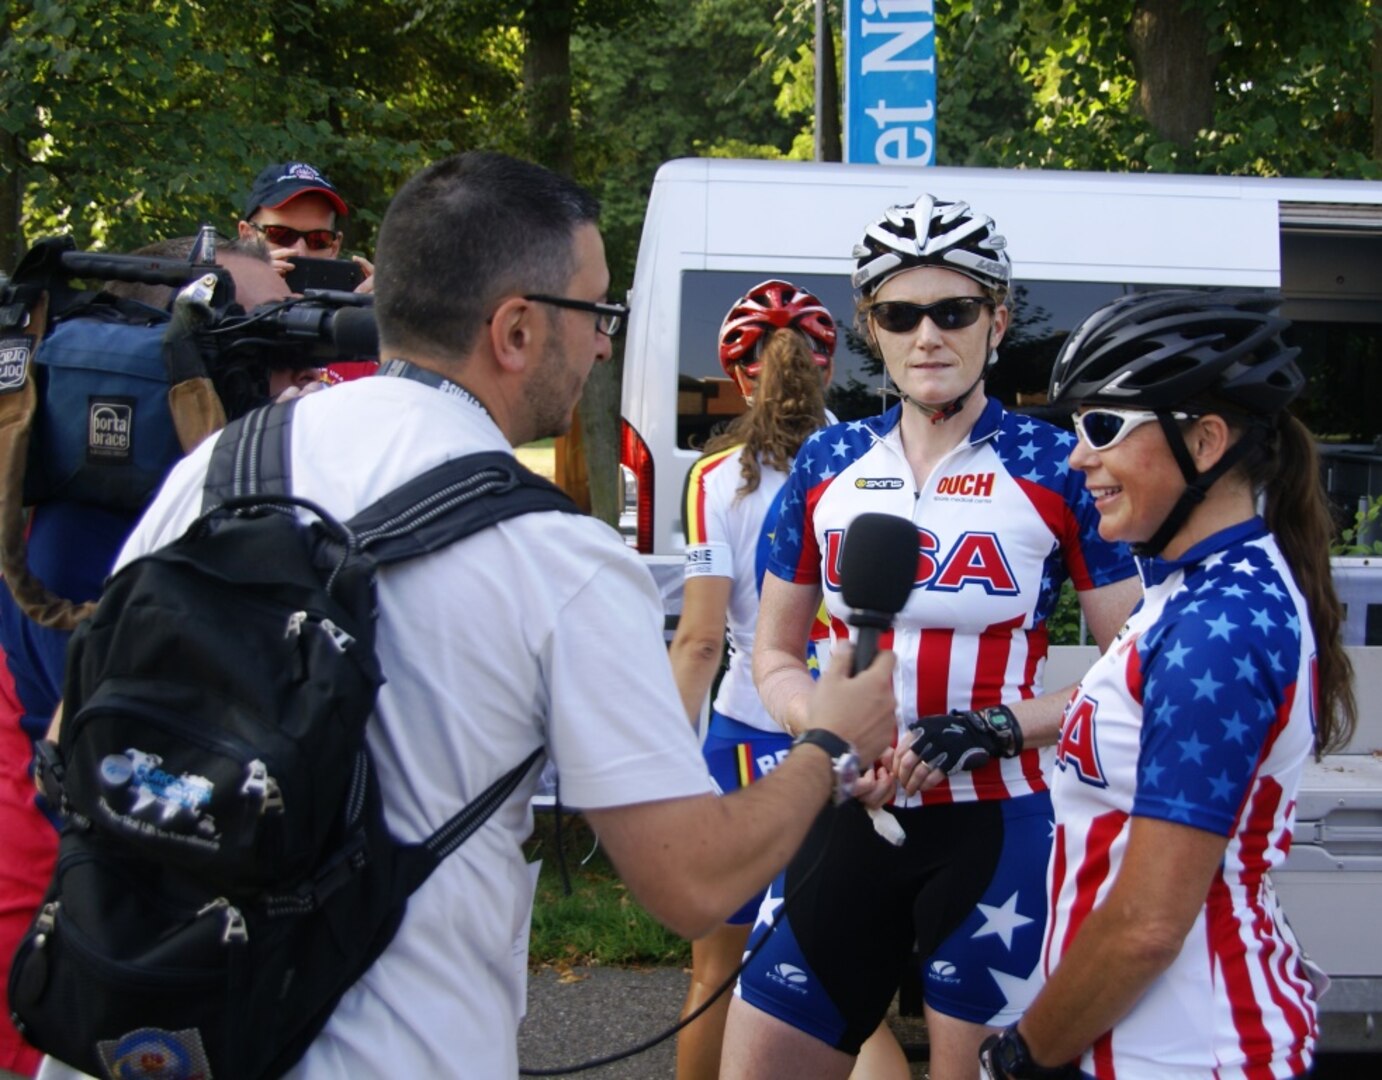 LCDR Katy Giles (Navy) (left) and SGT Maatje Benassi (Army) interview after their bronze medal performance.